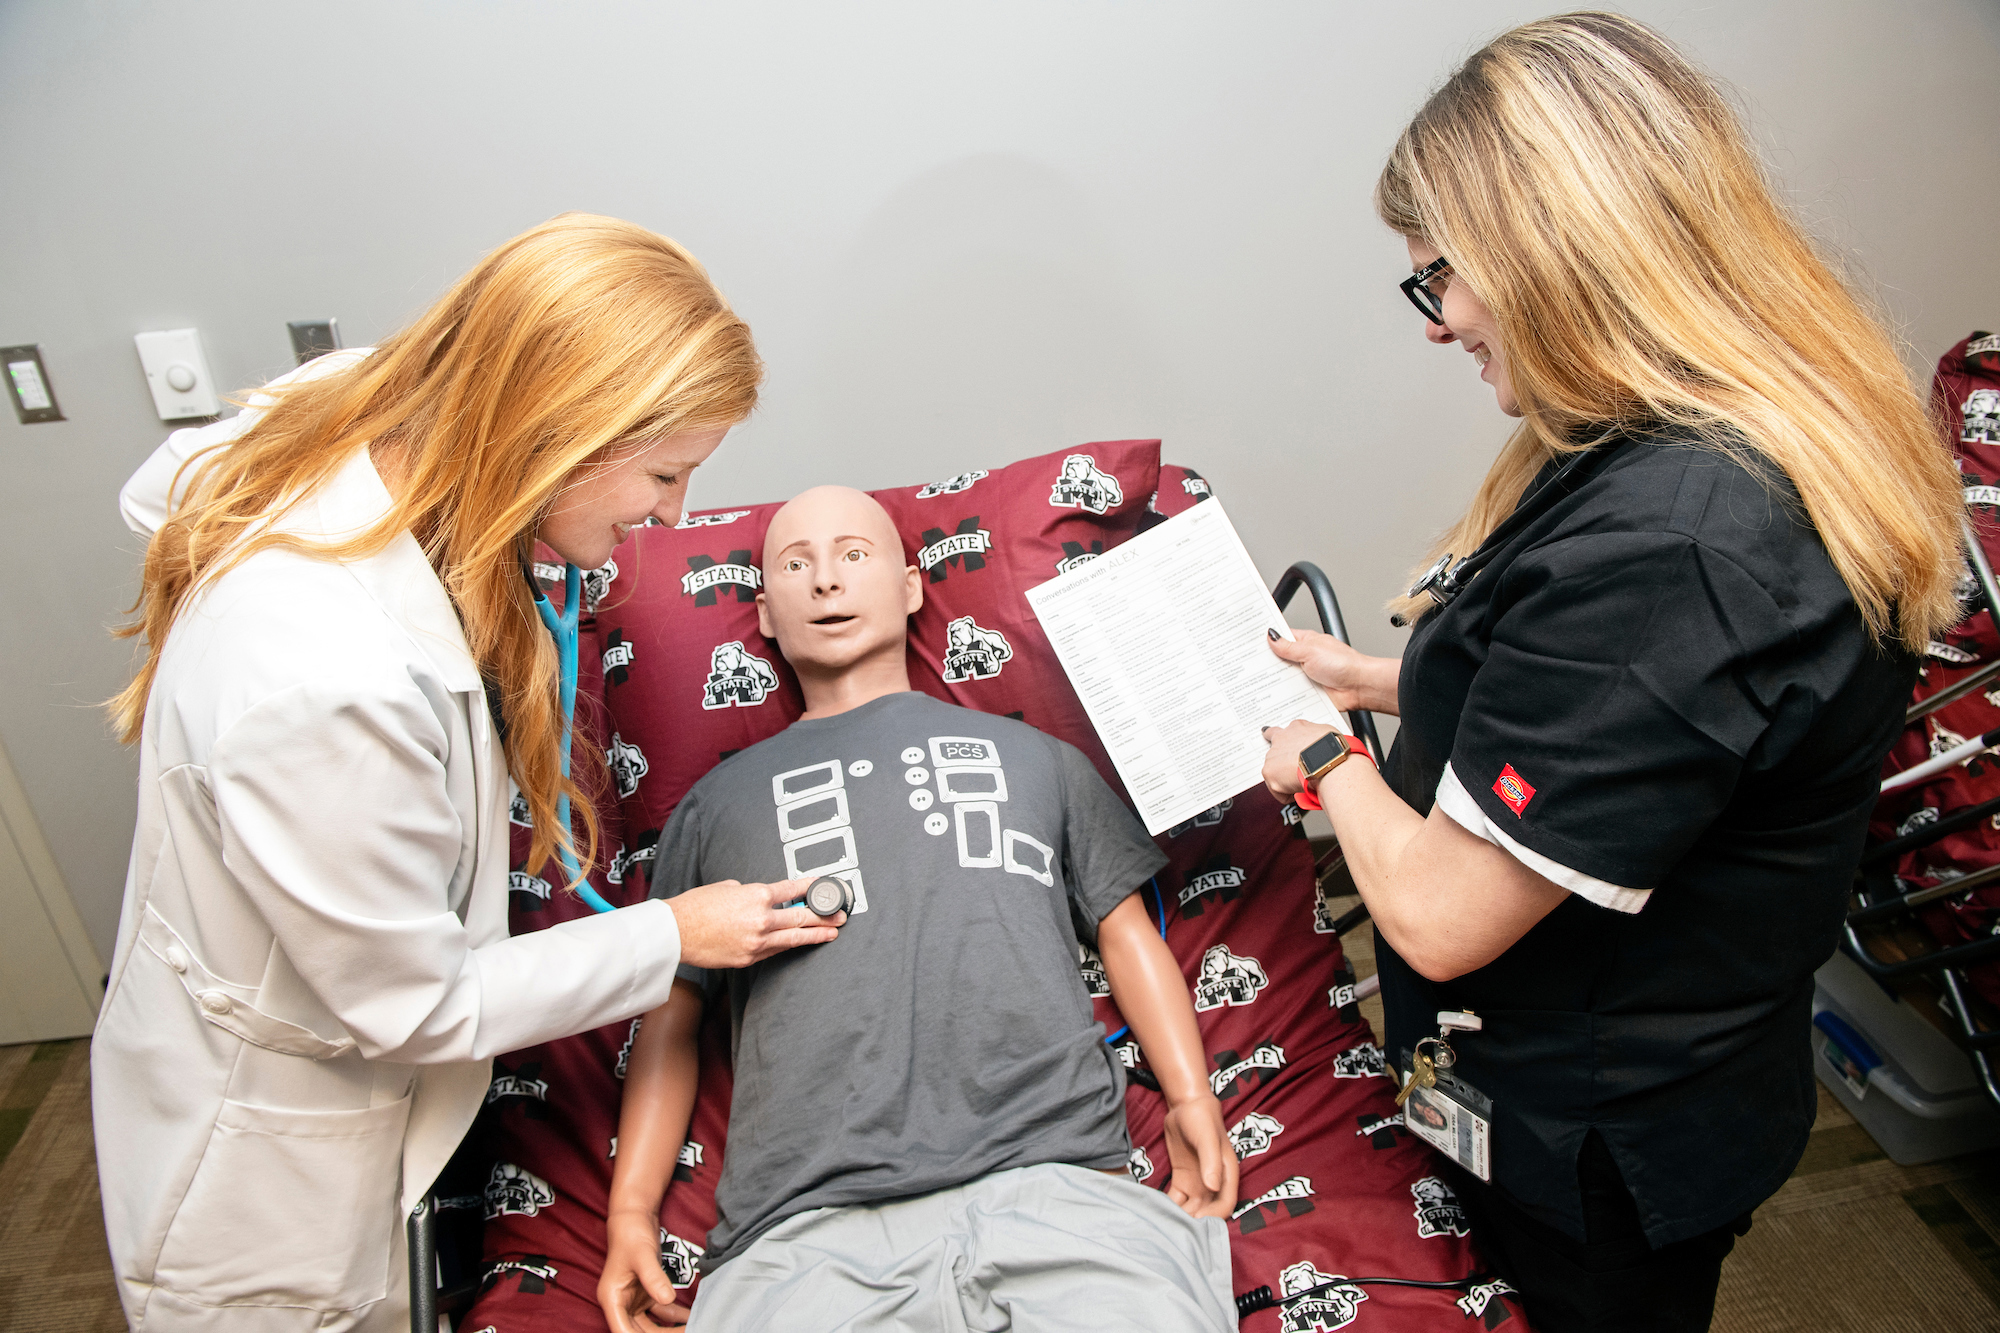 Shey Washburn, left, and Tara Milligan, assistant clinical professors with MSU-Meridian’s Master of Physician Assistant Studies program, demonstrate patient simulation equipment that will be used as part of the rigorous 29-month curriculum. The program’s 